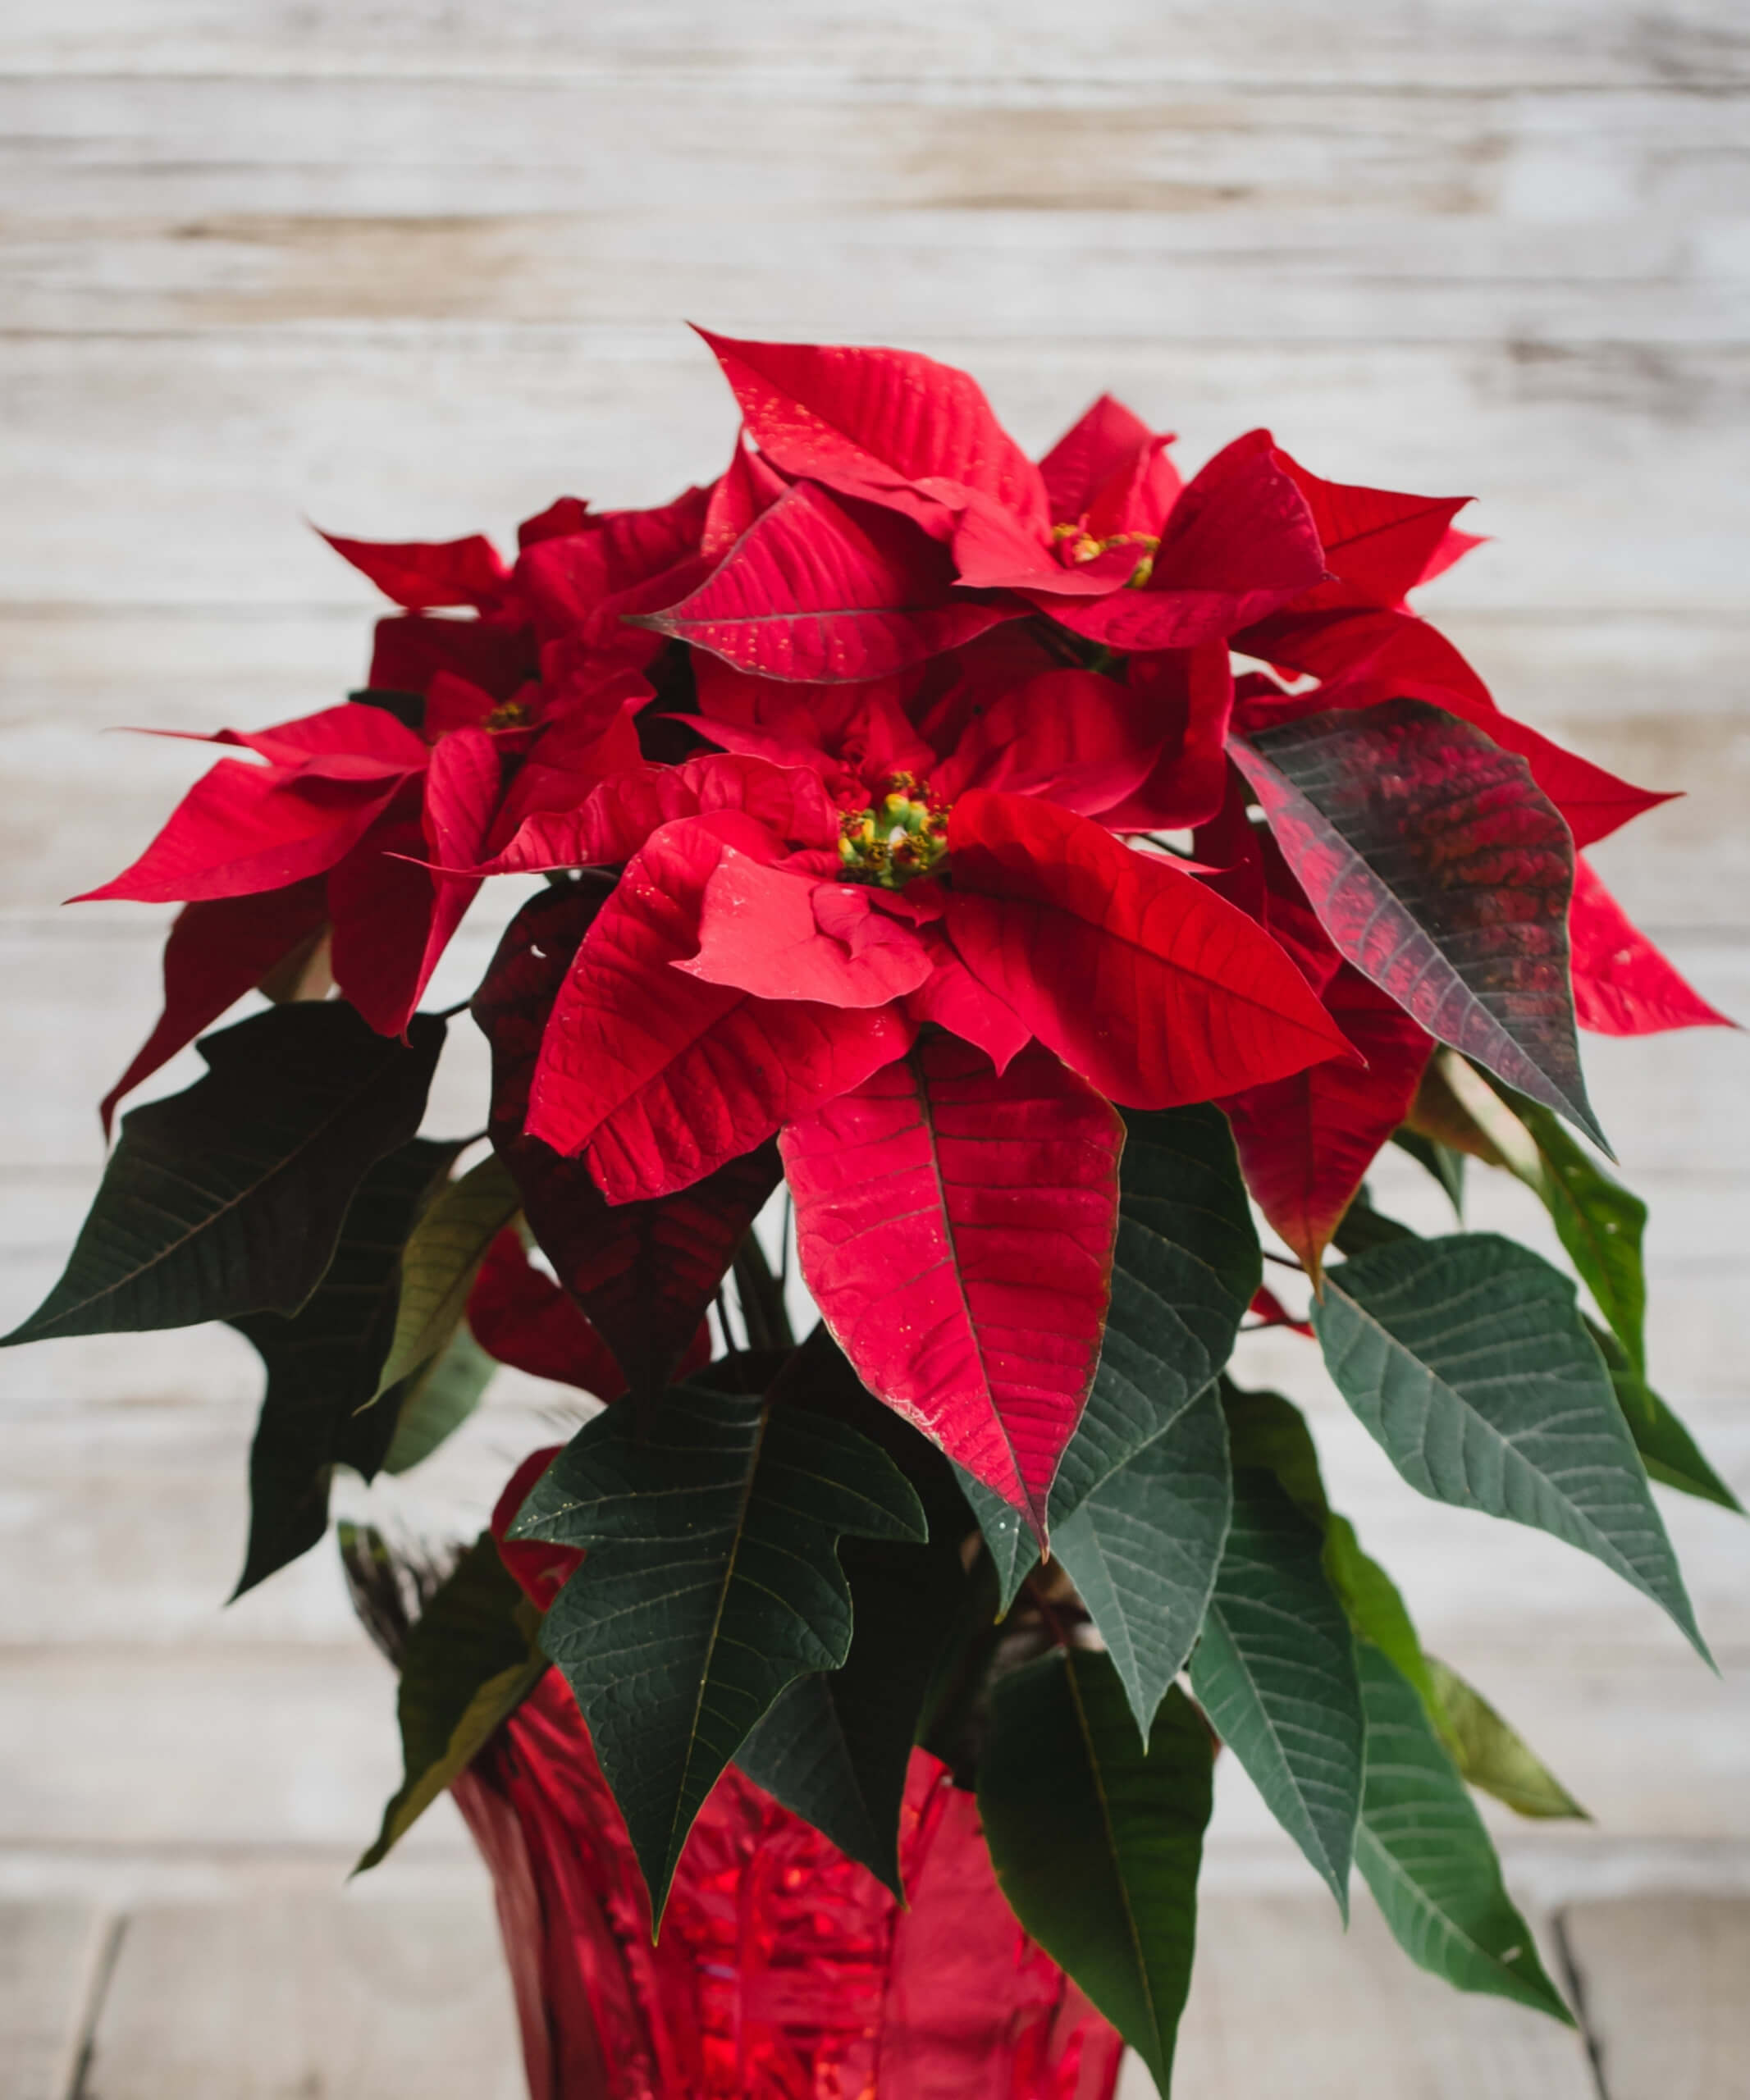 Poinsettia 101: How to Care for Poinsettias | Bloomscape